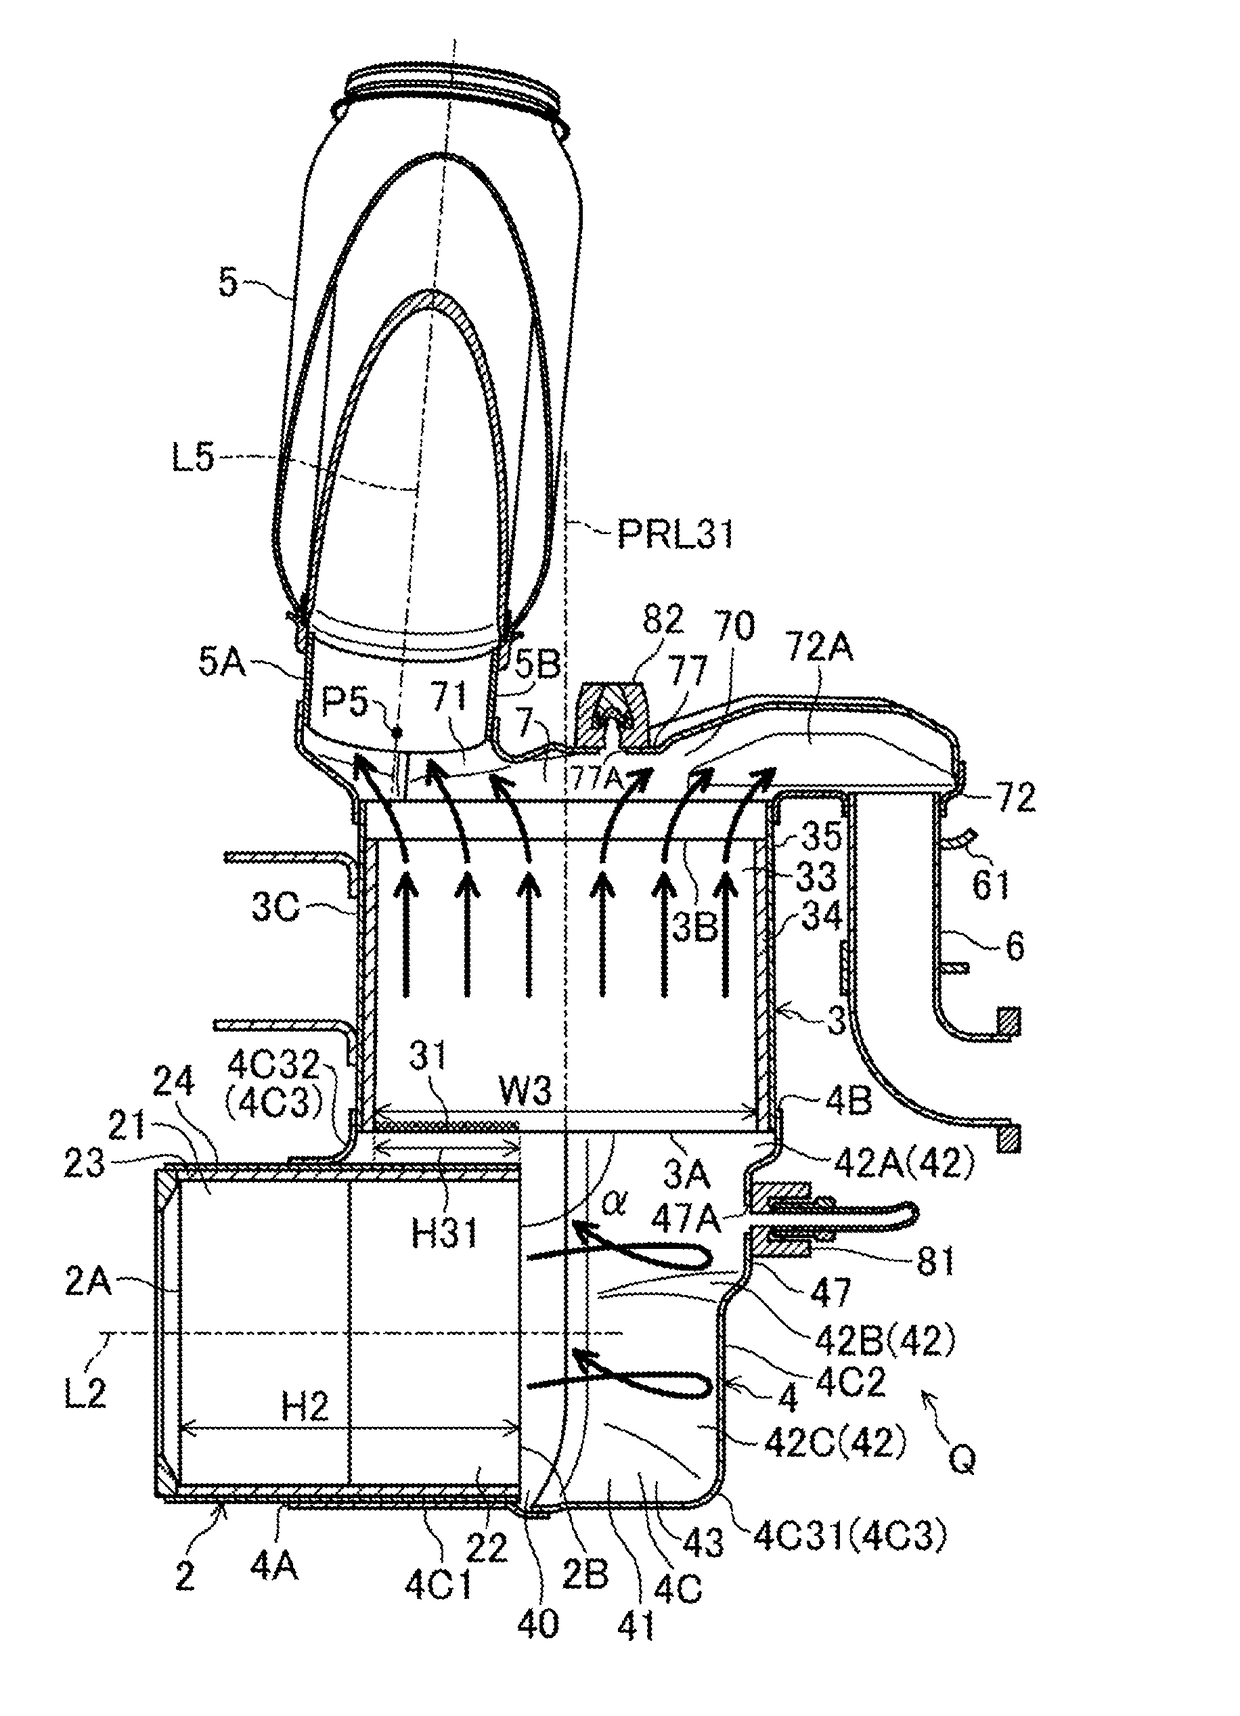 Exhaust device of engine